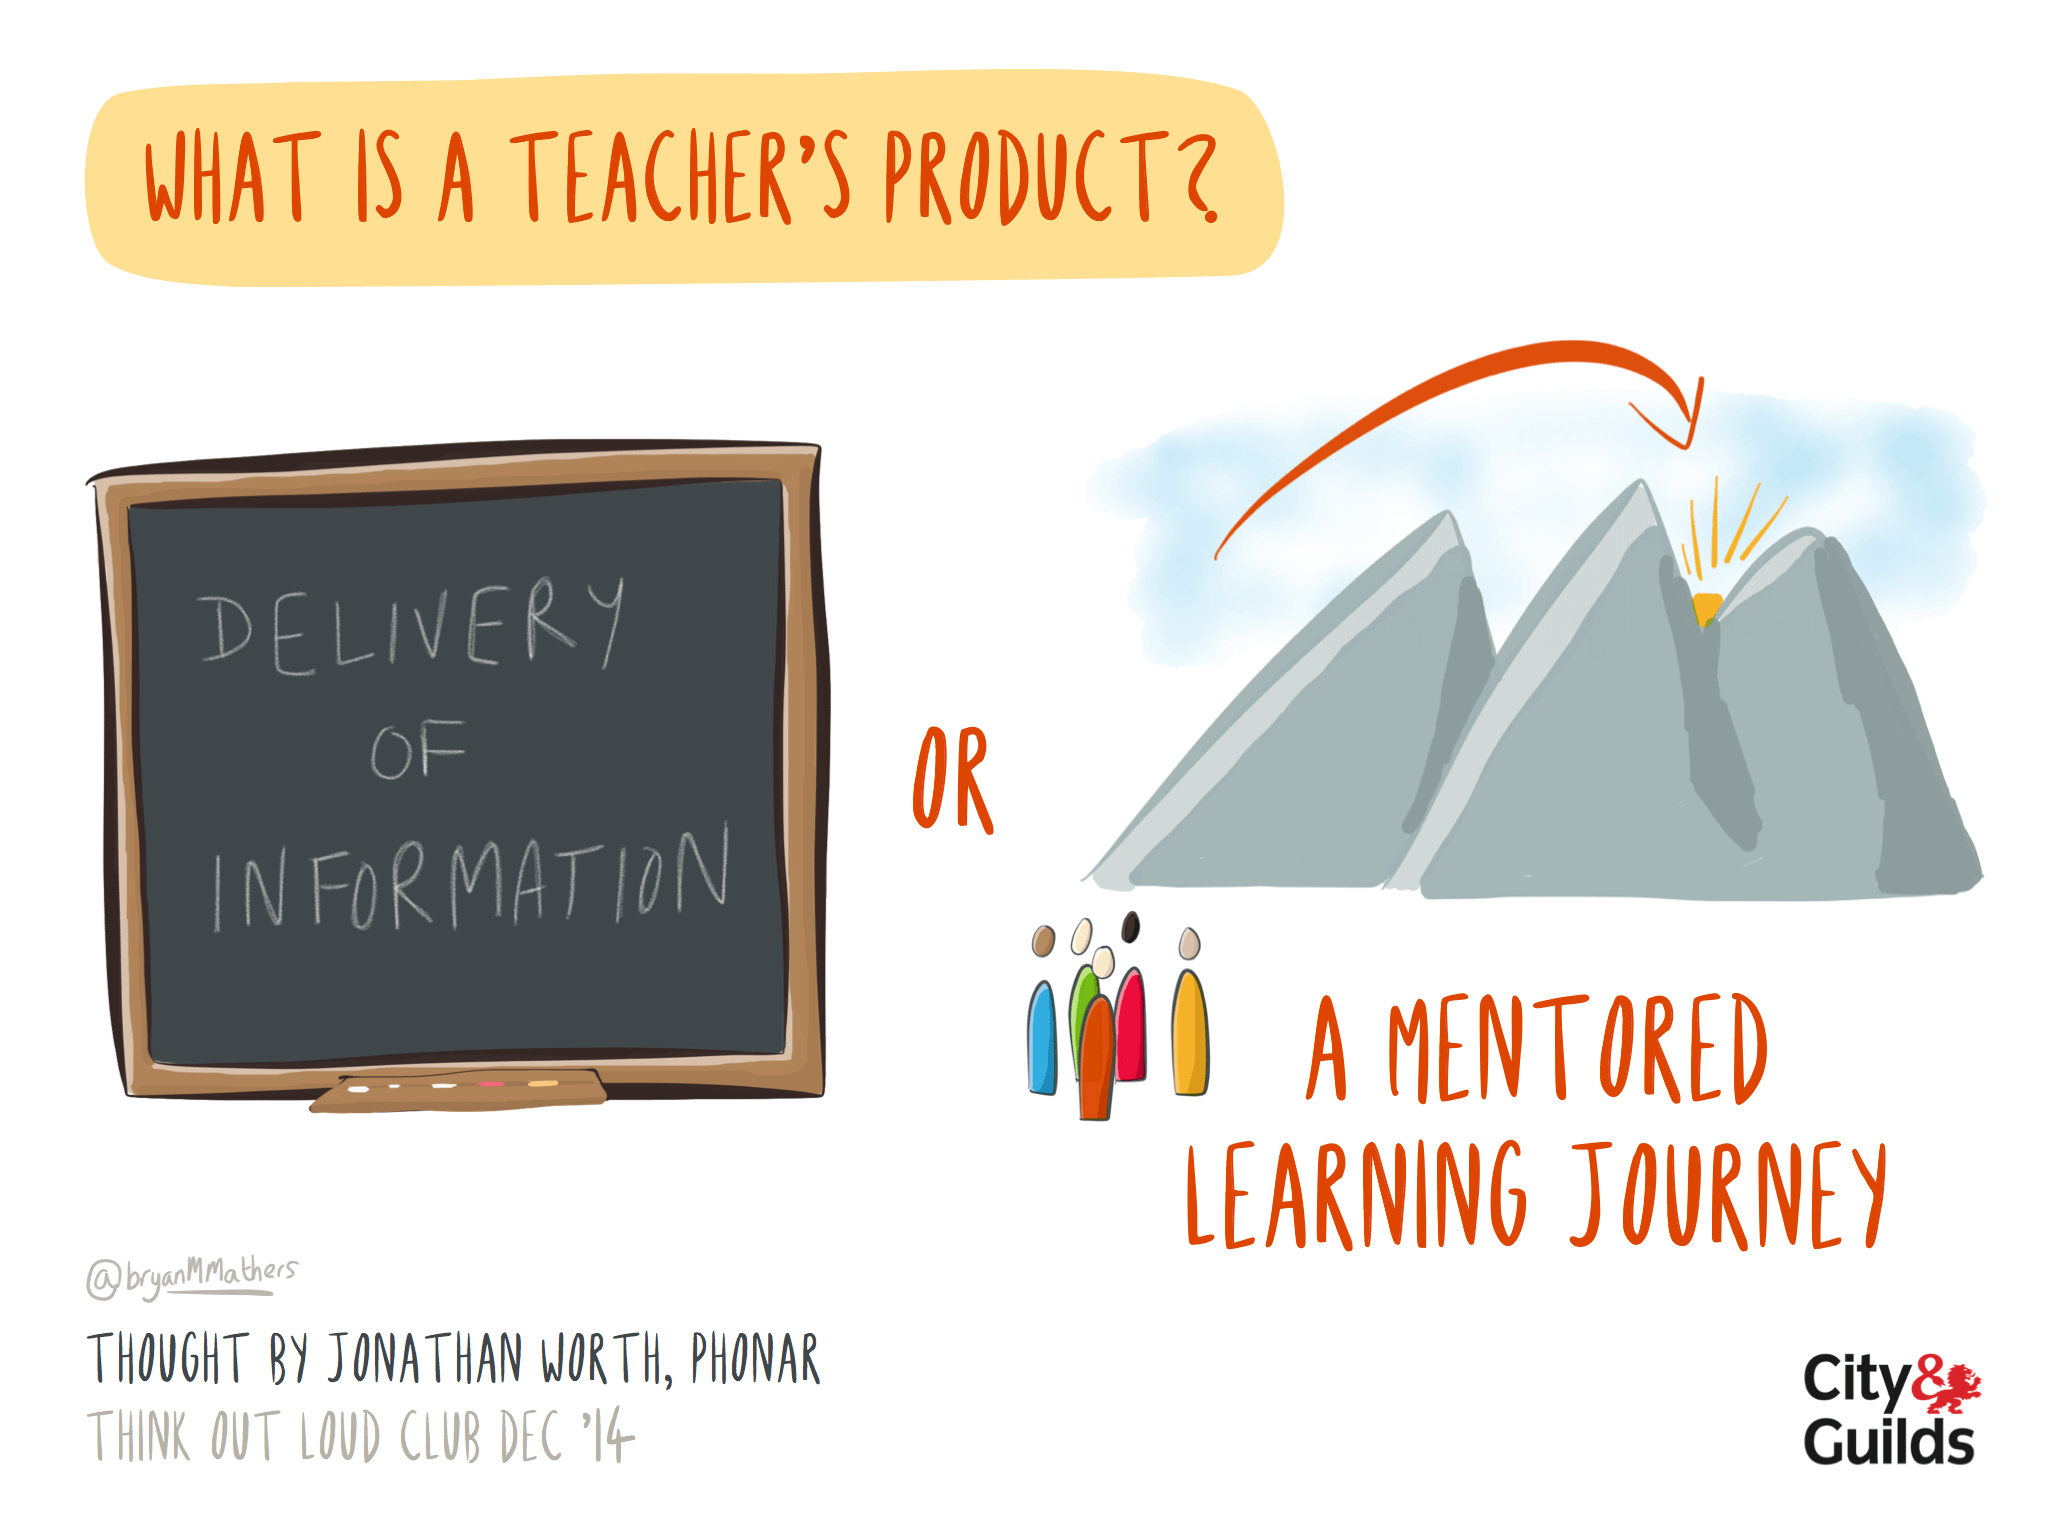 What is a teachers product?